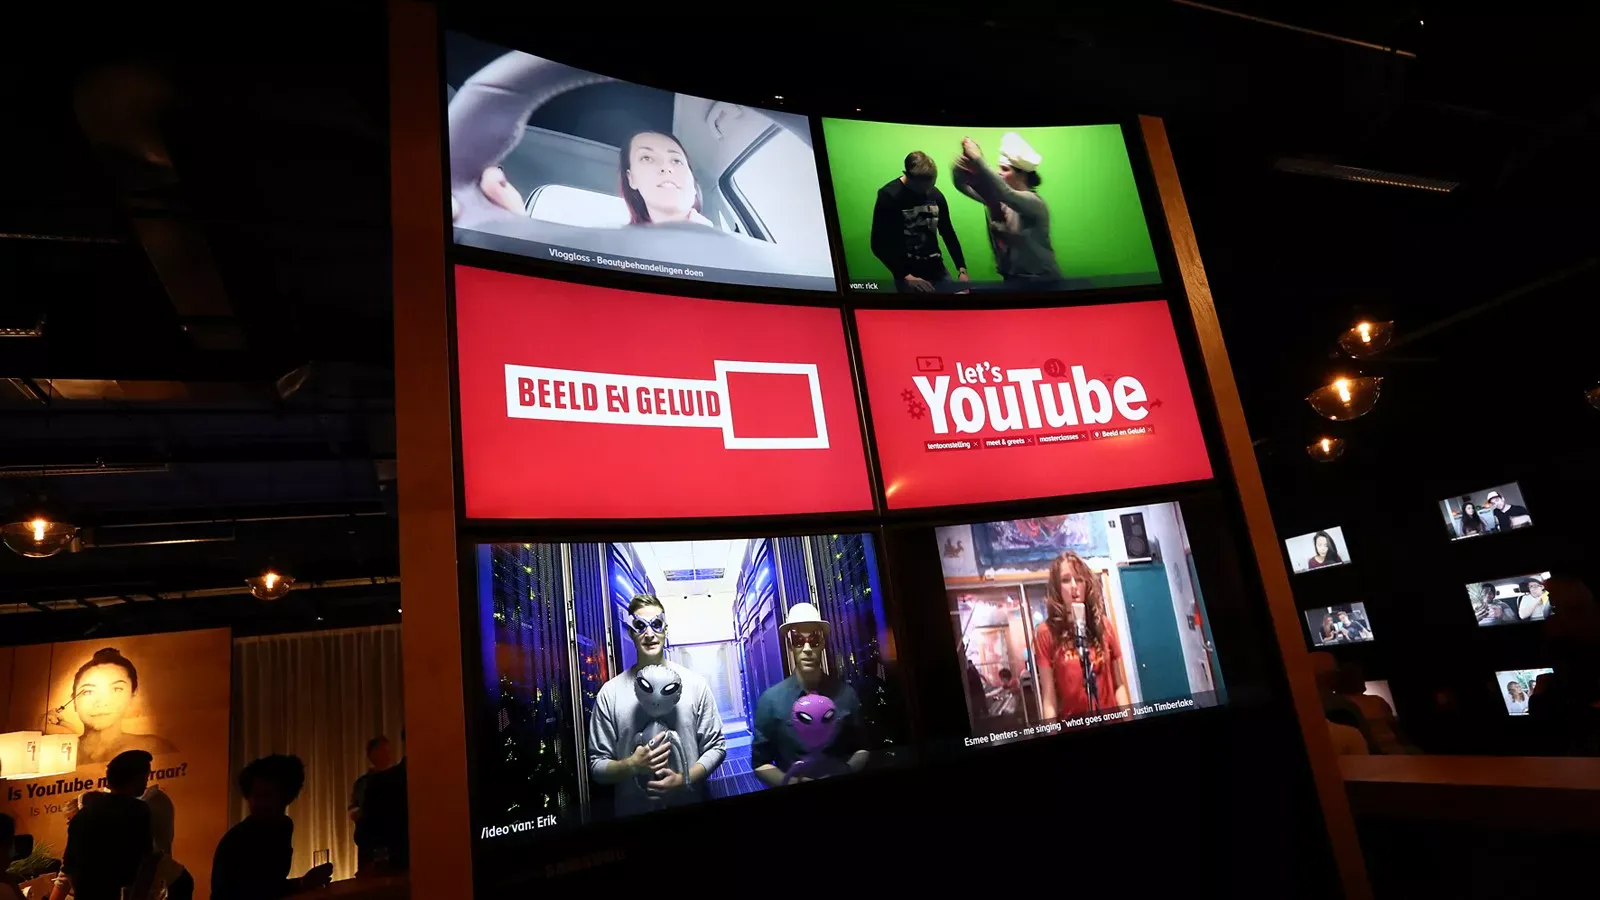 Let‘s YouTube, world’s first exhibition about YouTube